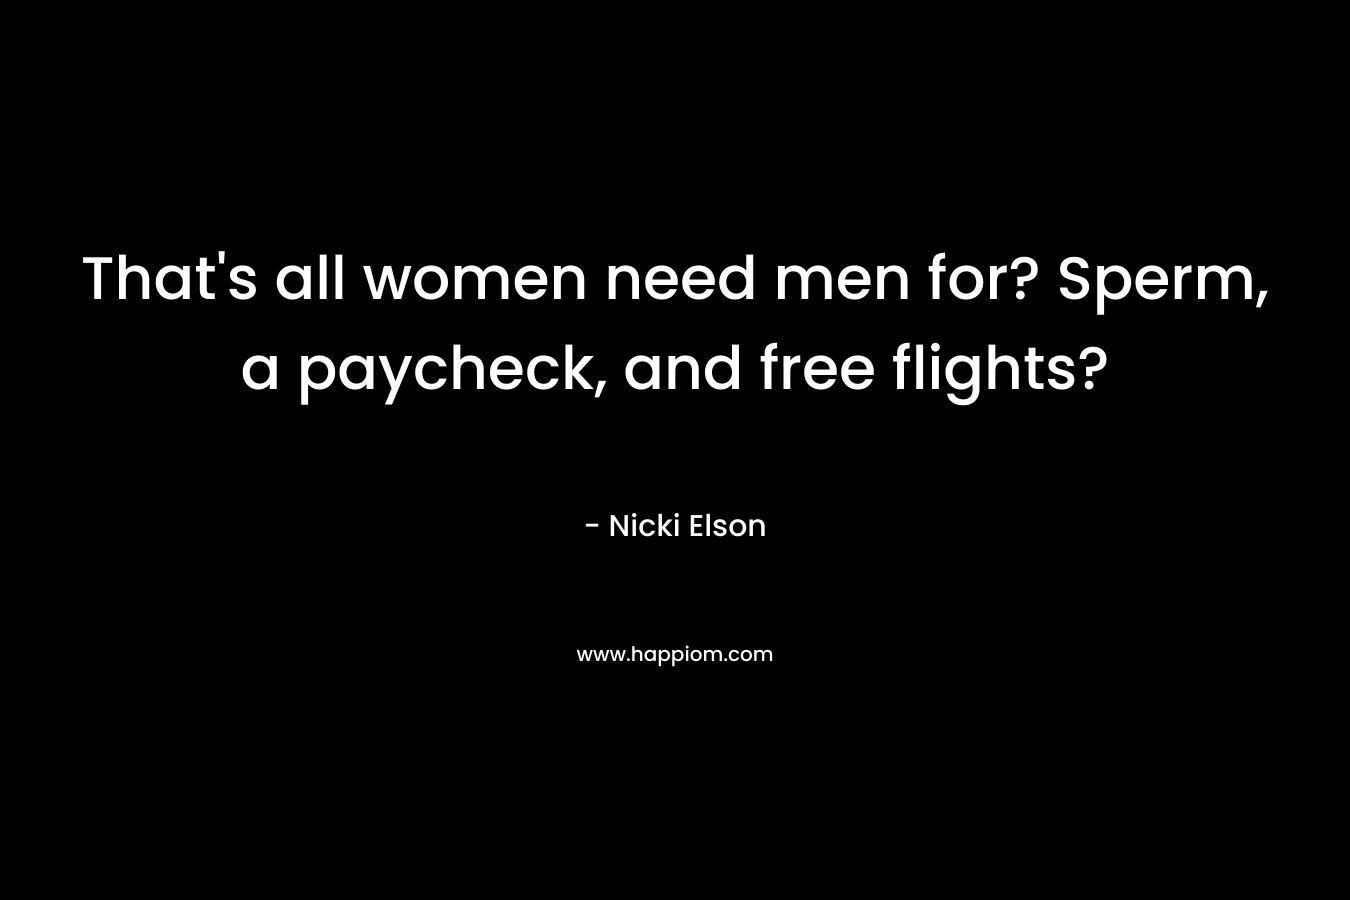 That's all women need men for? Sperm, a paycheck, and free flights?